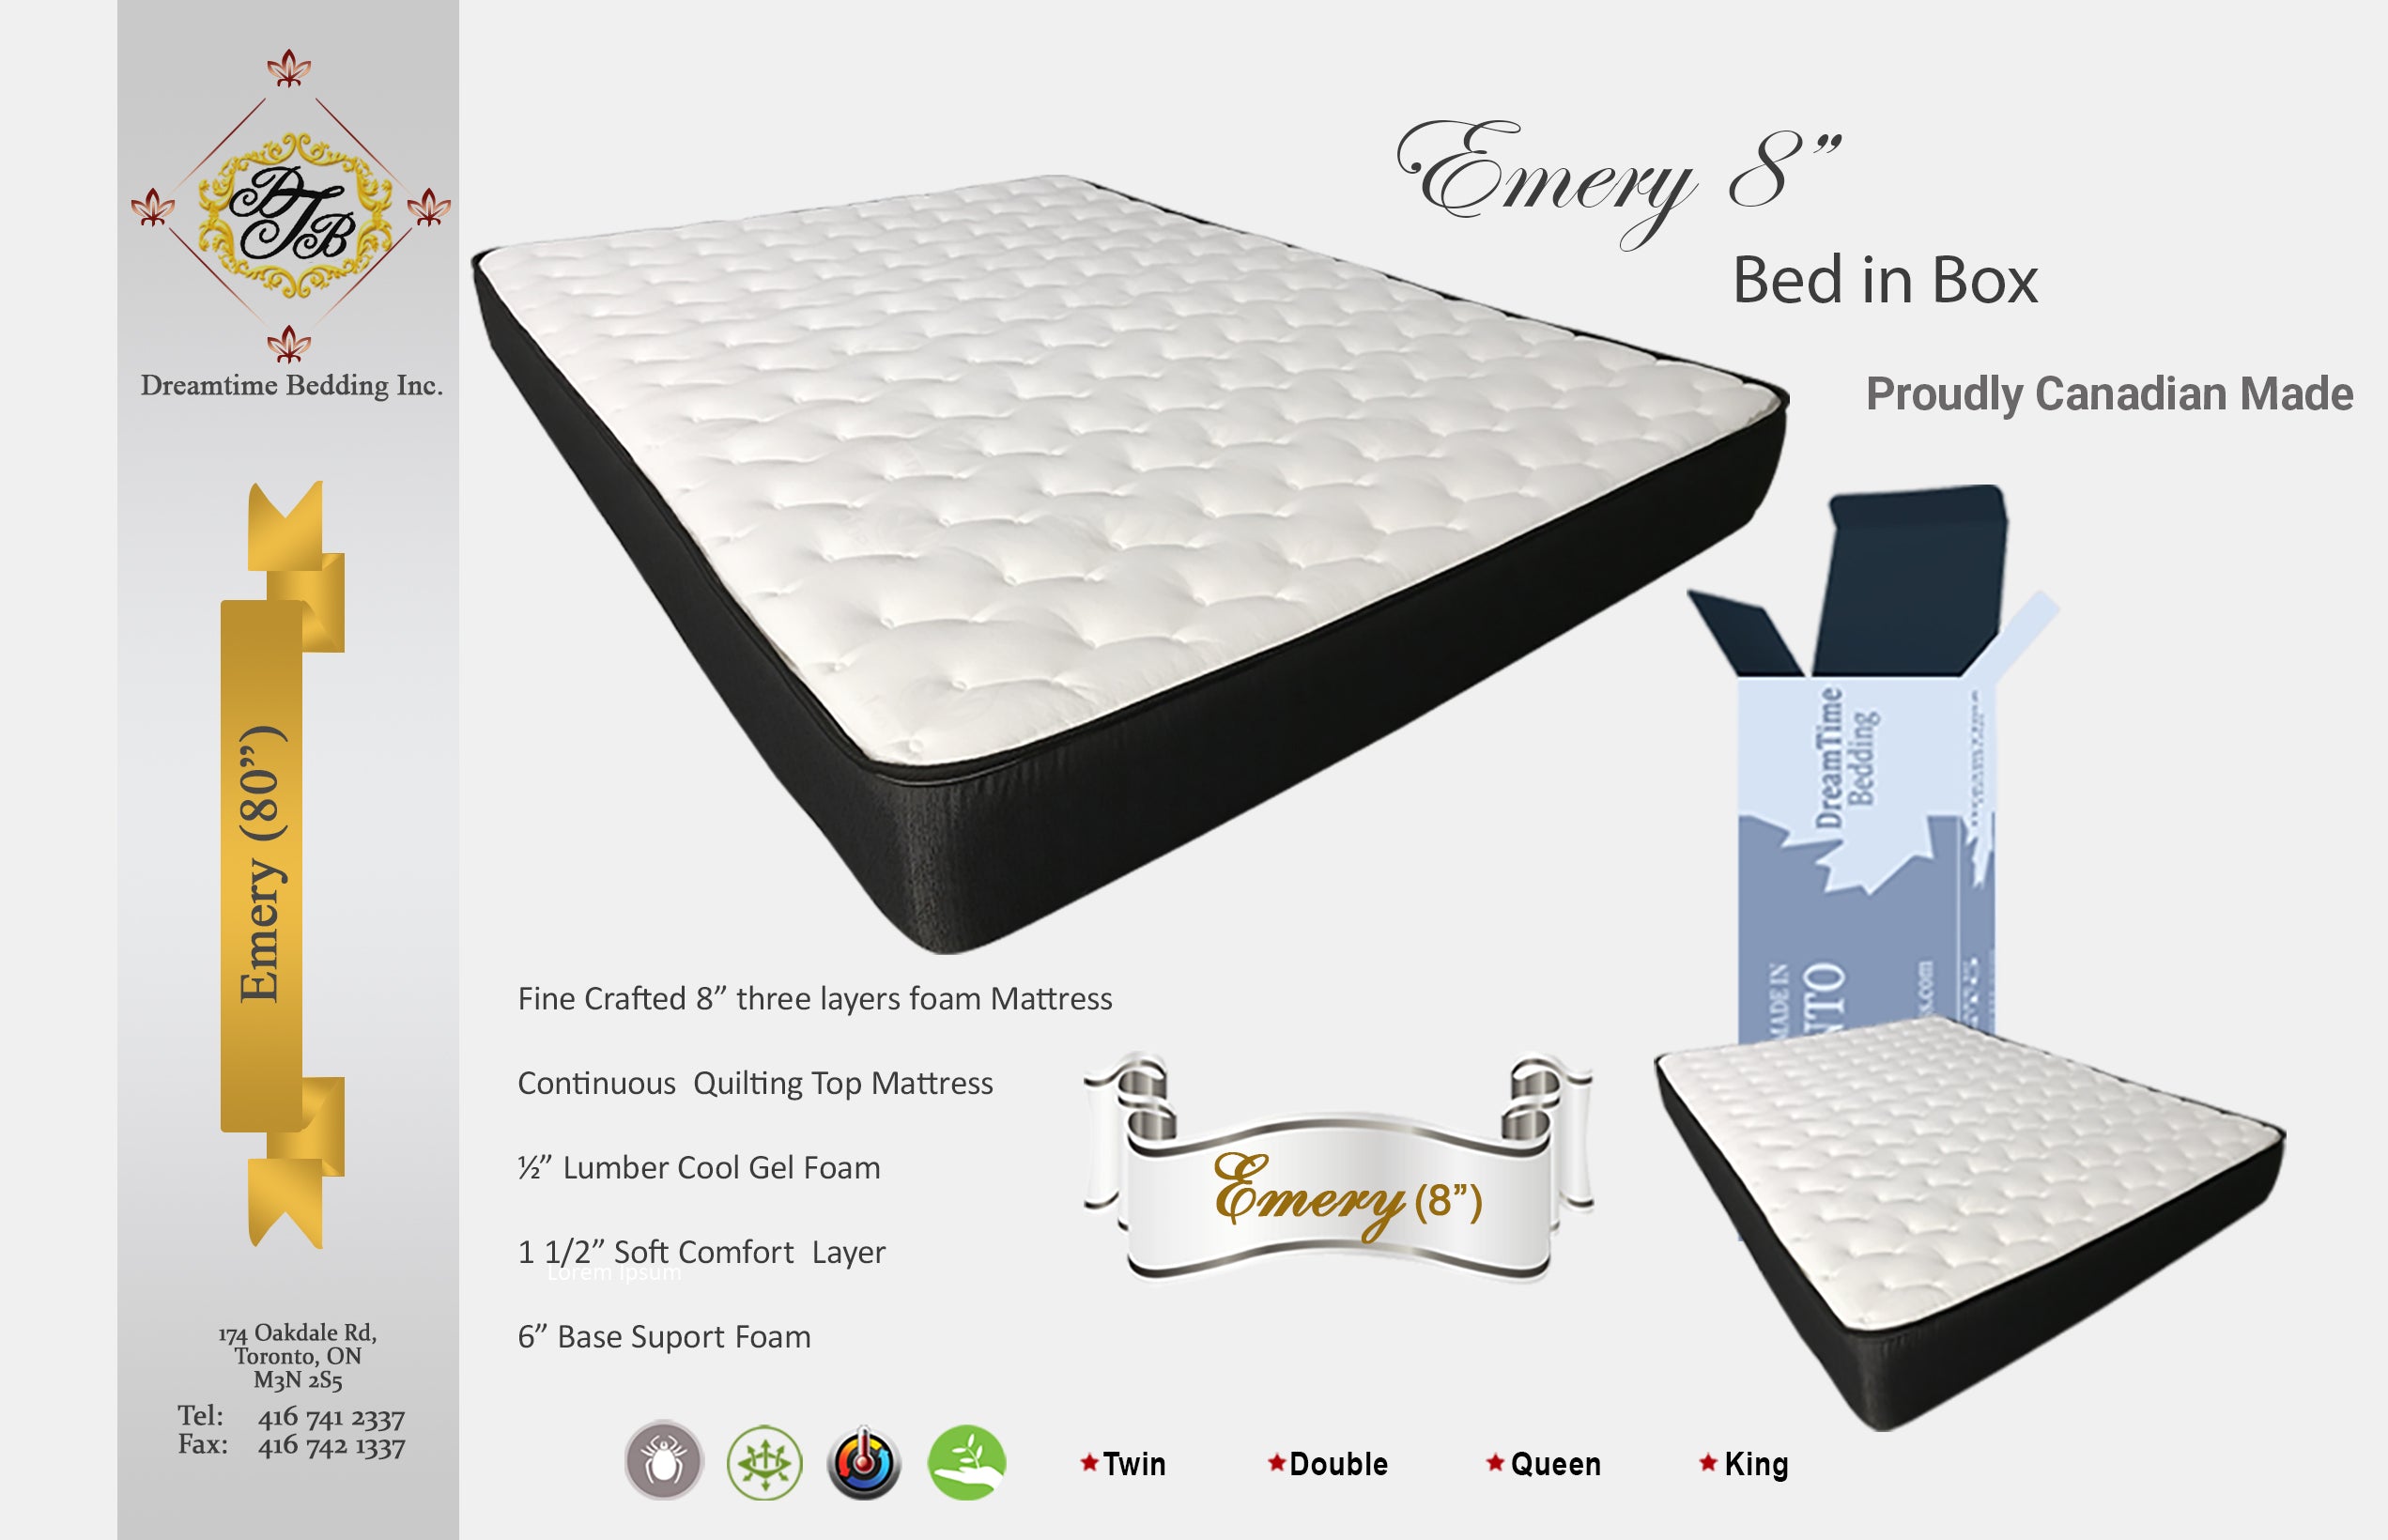 Mattress 10" Easy Go tight top - Bed in a Box